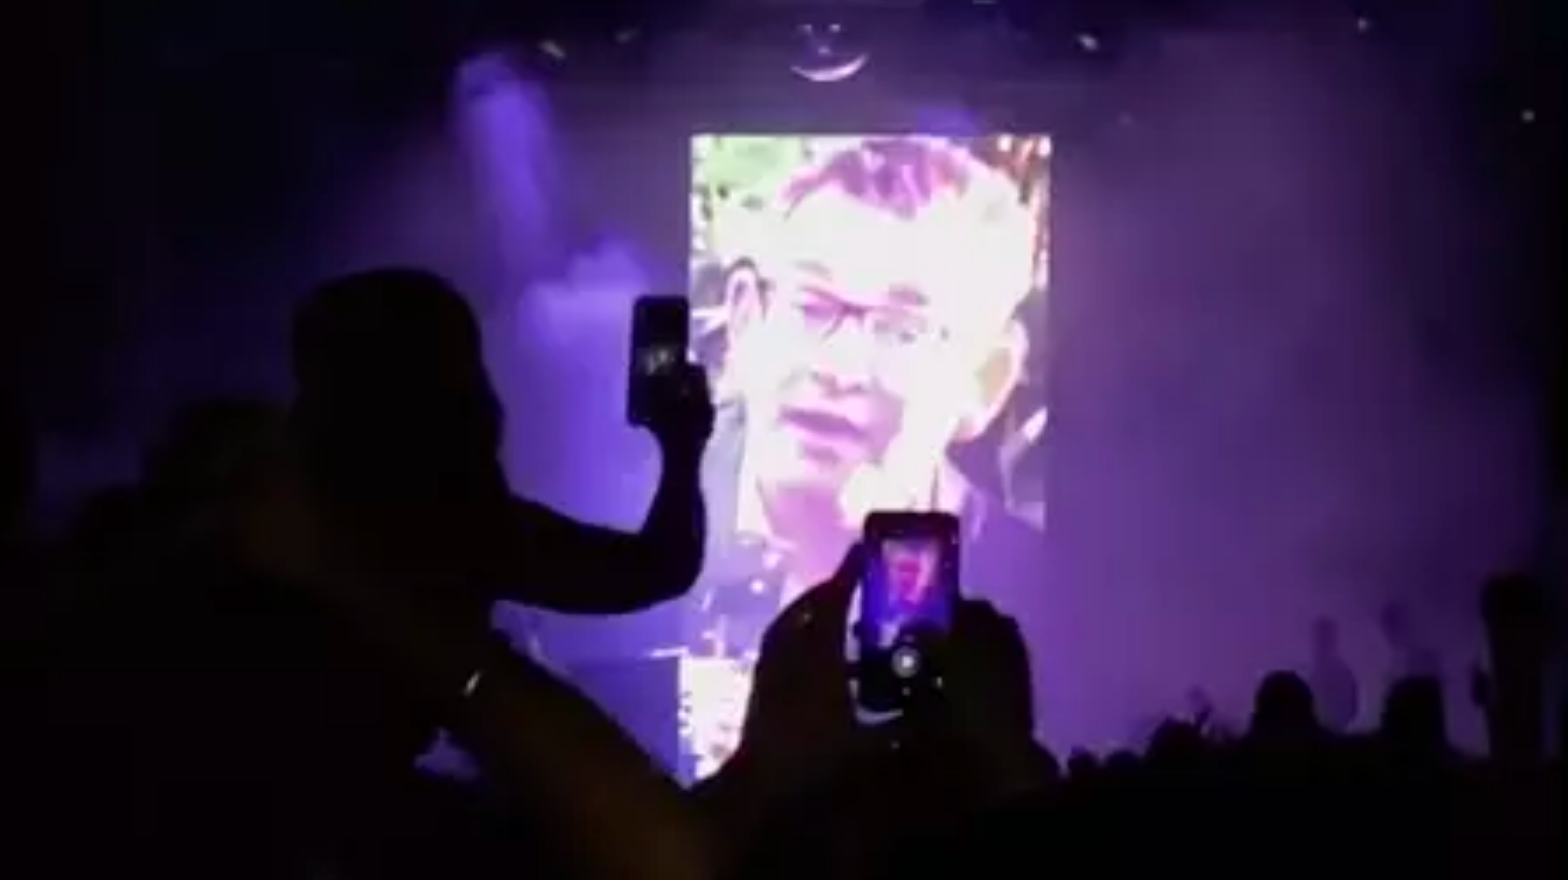 A screenshot of Dan Andrews being played in a nightclub in Perth taken from a tiktok